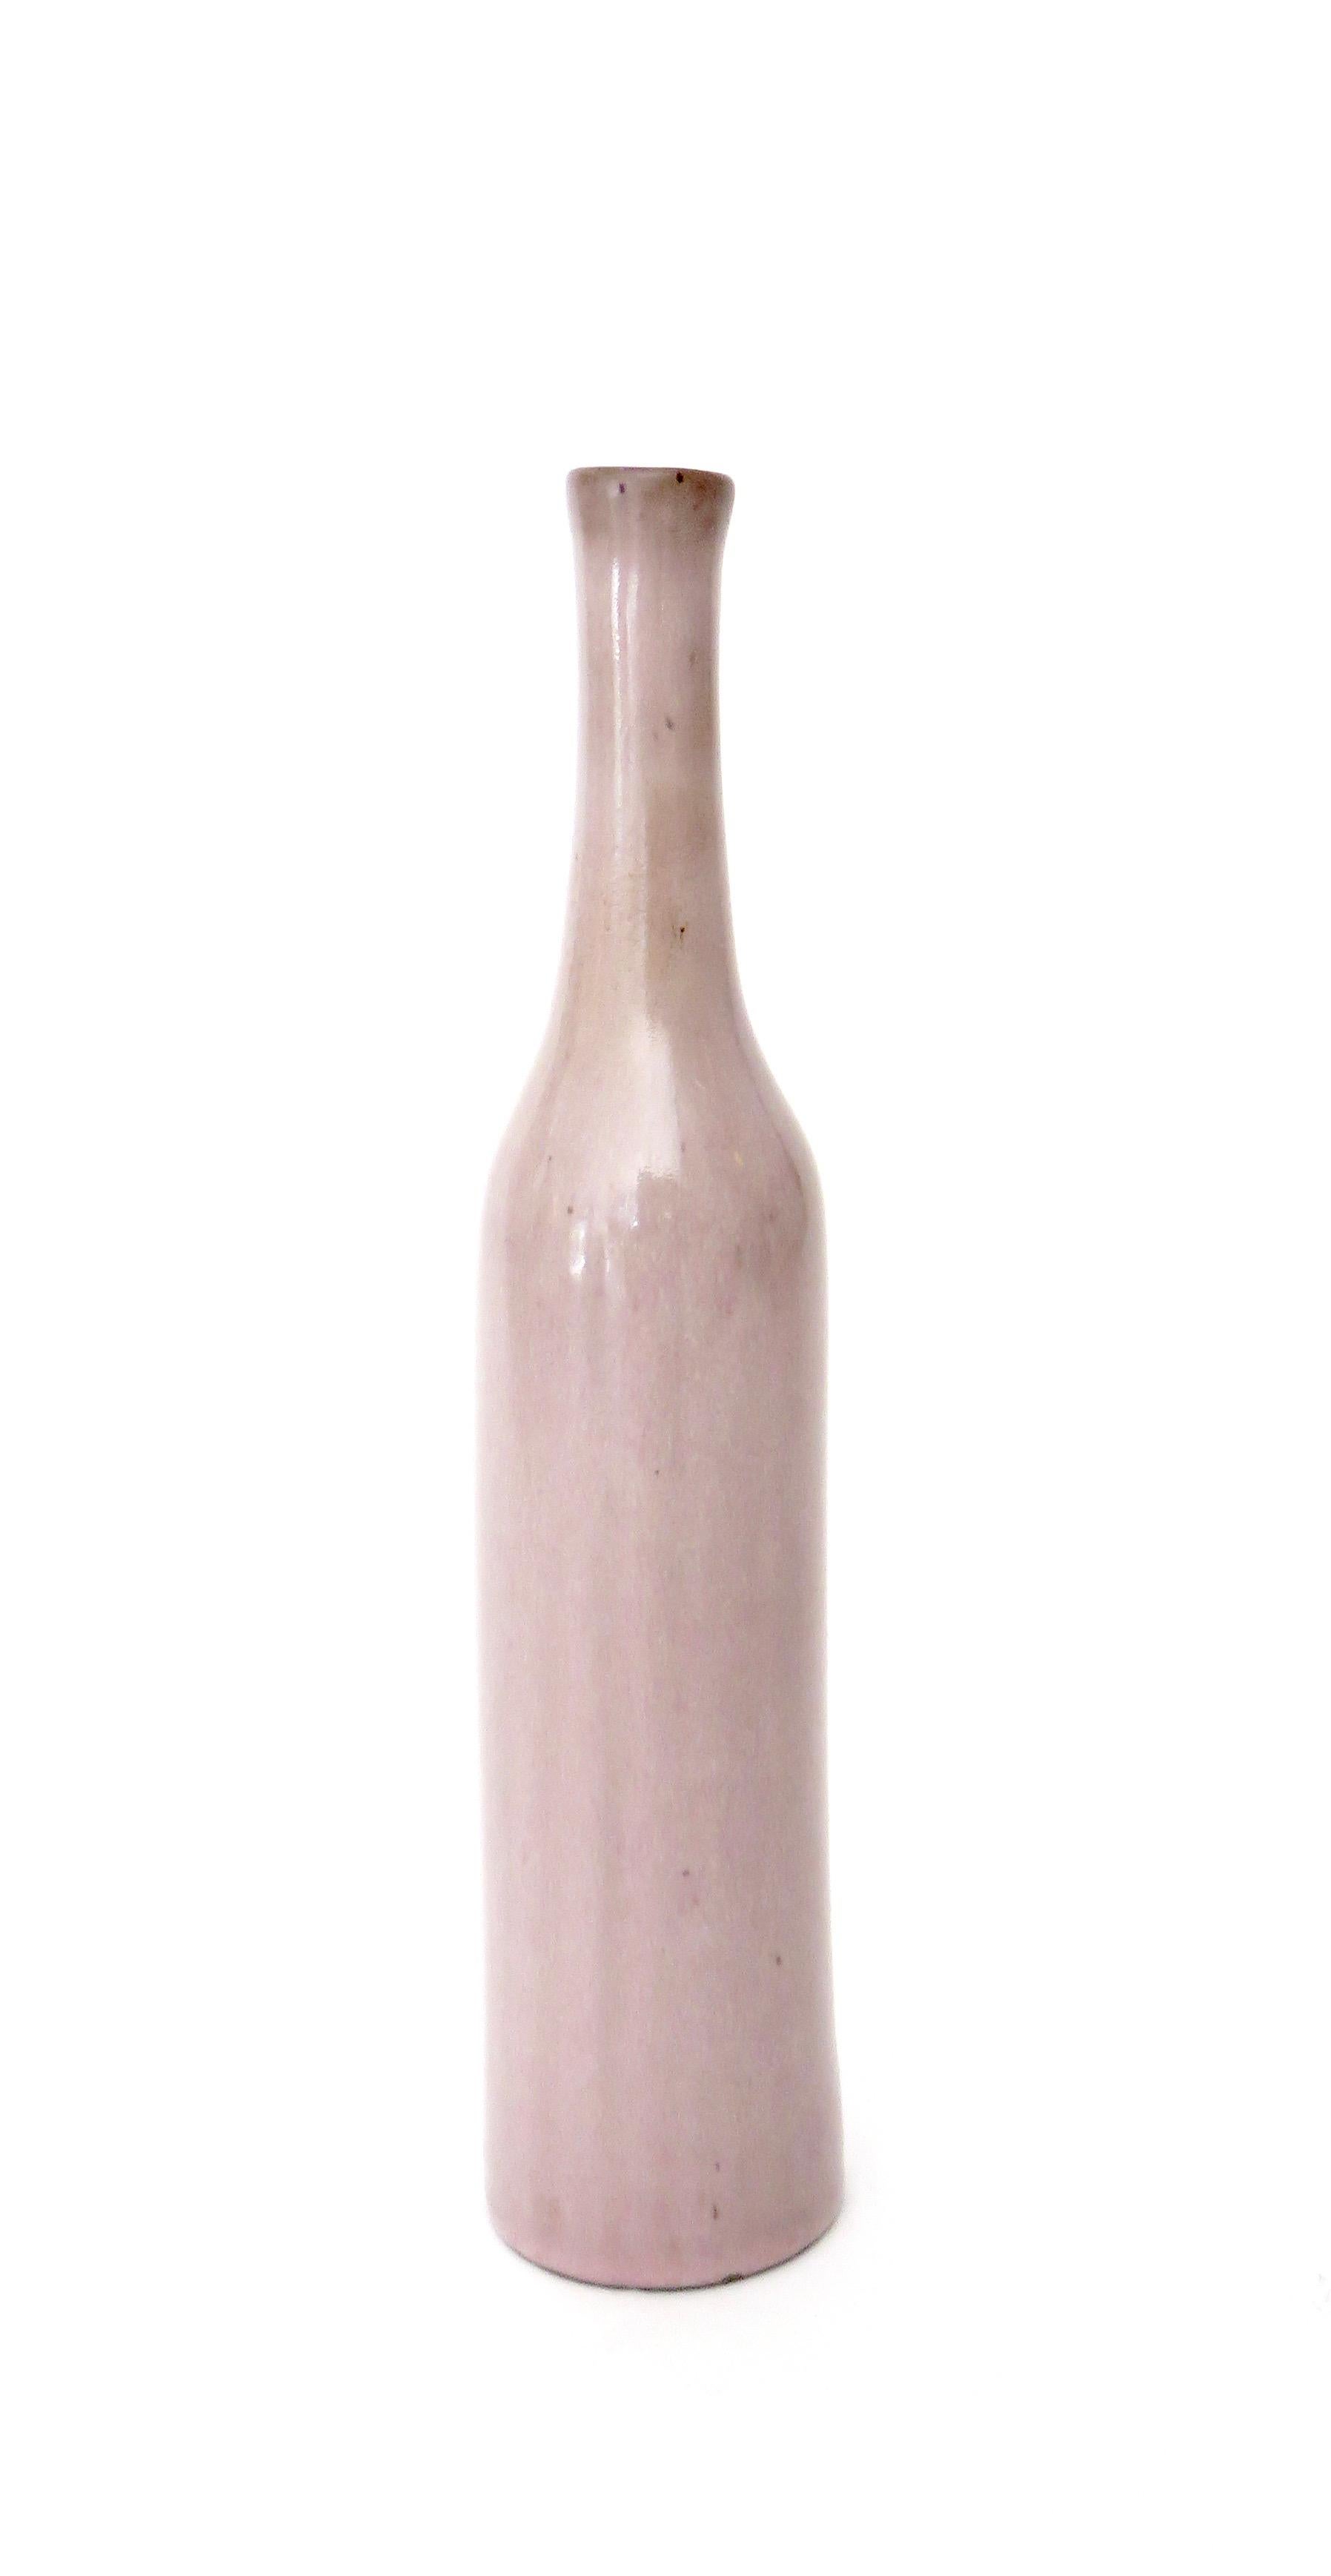 An iconic bottle form by the French ceramic artists Jacques and Dani Ruelland. A pale rose pink to lavender glaze. Signed.
Literature: Pierre Staudenmeyer, La Ce´ramique Francaise des Anne´es 50, Paris 2001, pp. 284-85, for similar examples.